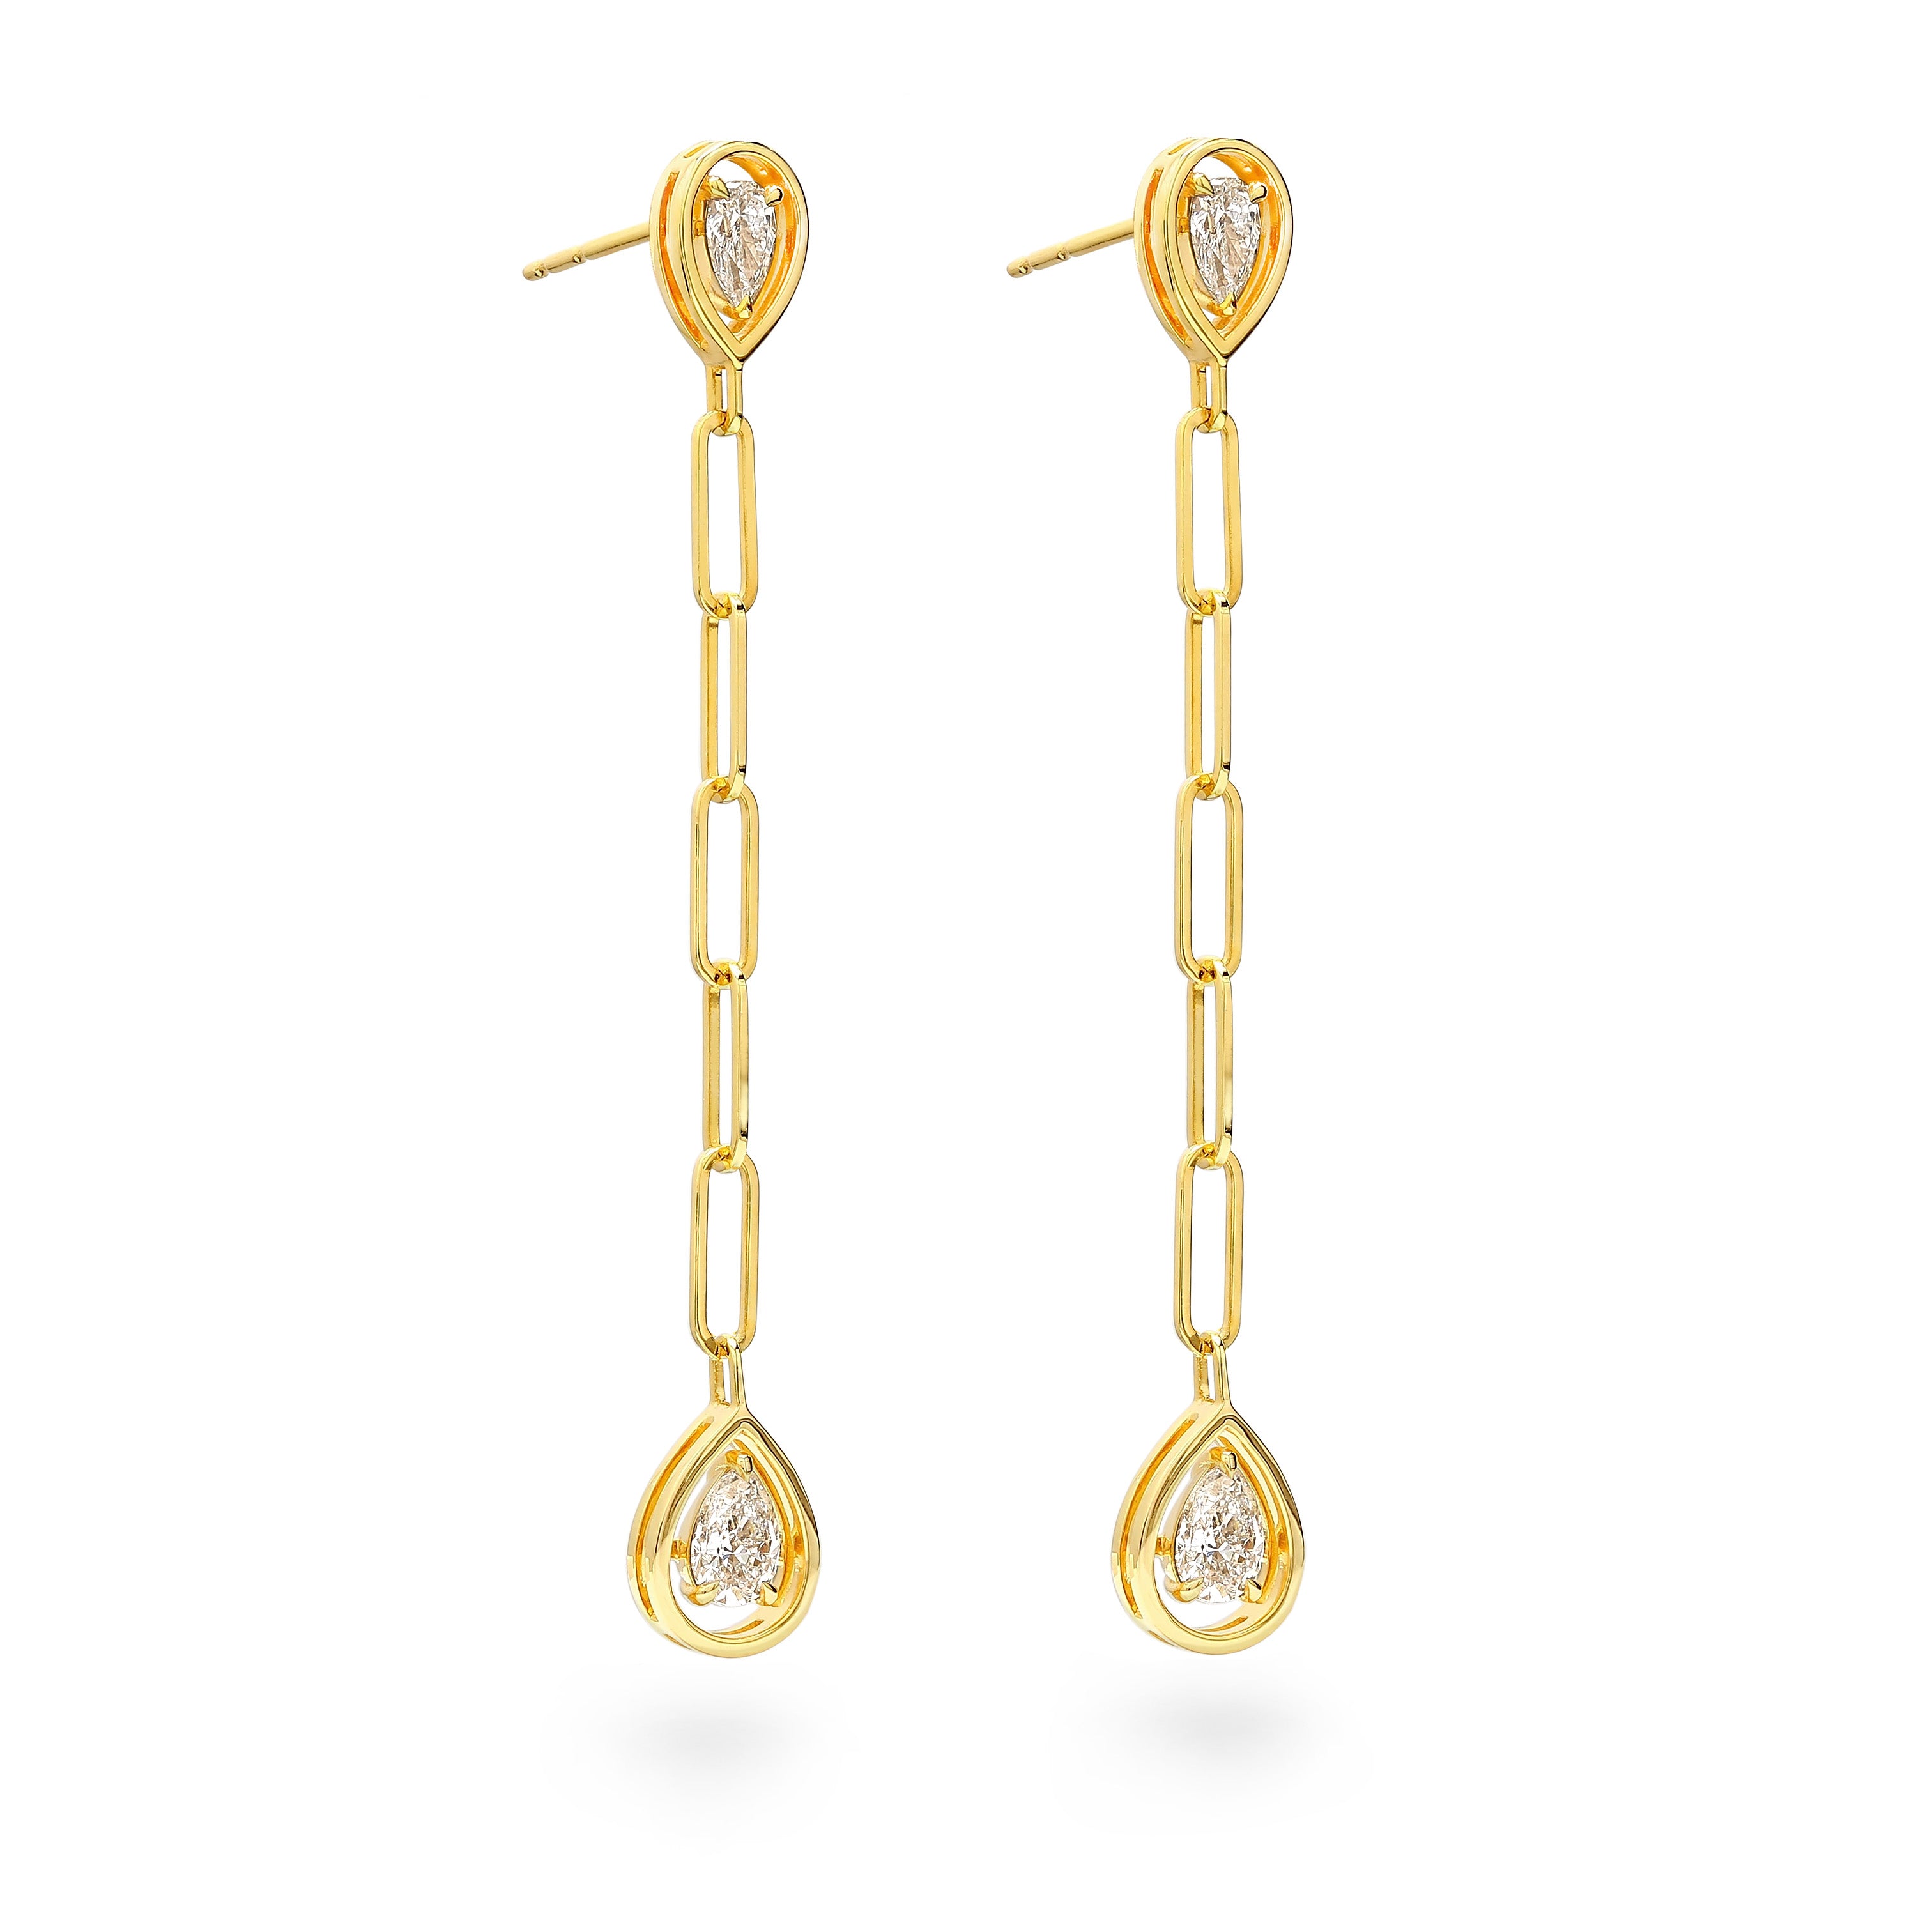 Shimansky - Saturn Pear Diamond Drop Earrings 0.70ct crafted in 14K Yellow Gold